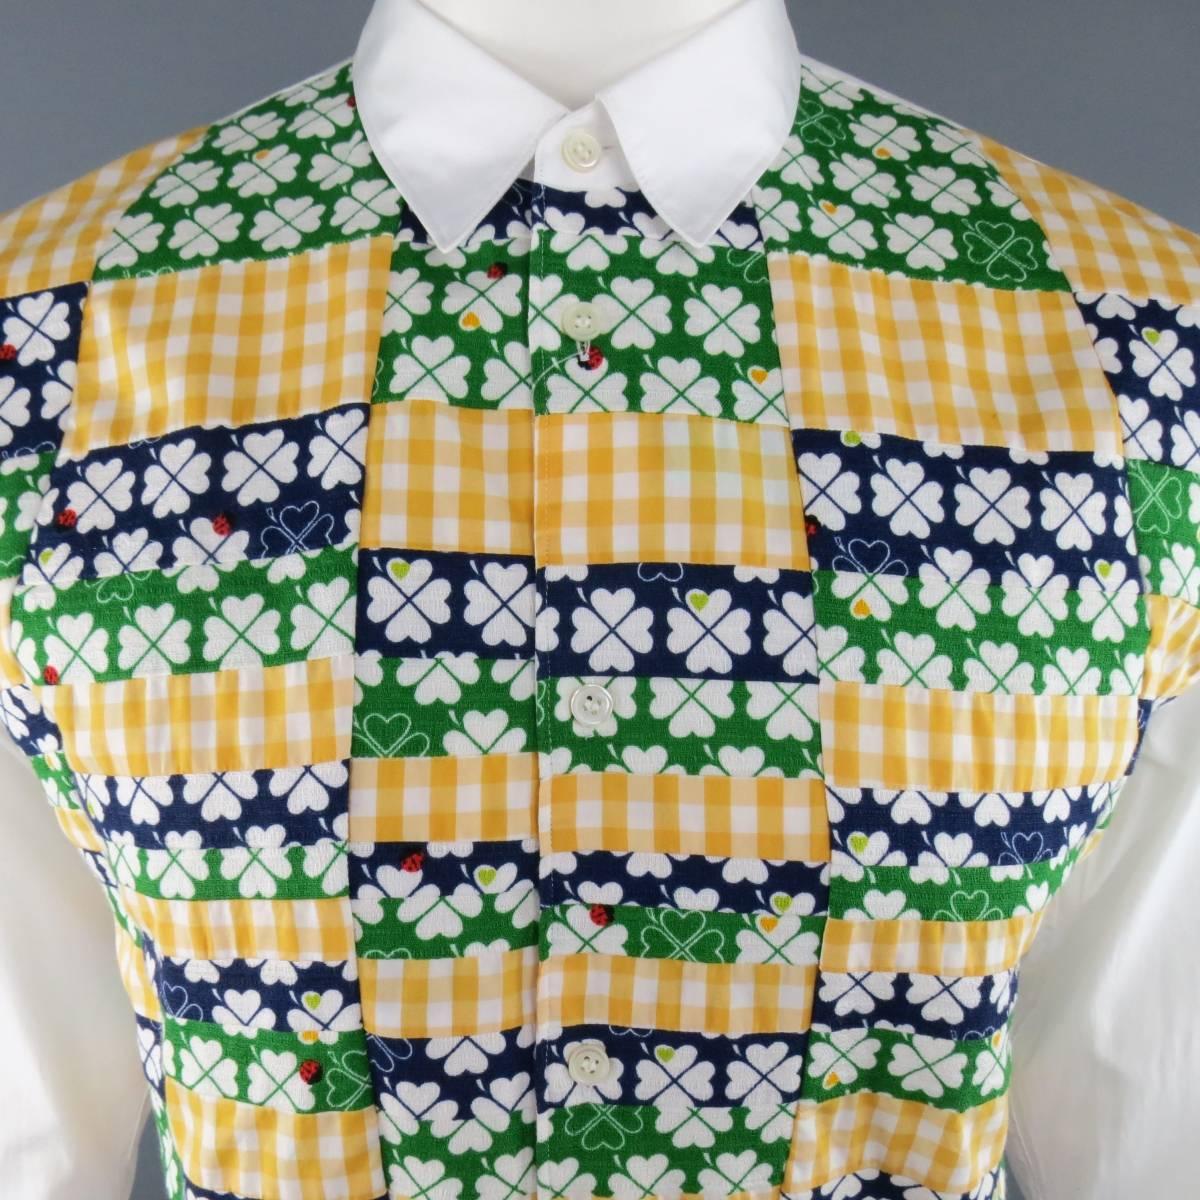 New with Tags COMME des GARCONS Long Sleeve Shirt consists of cotton material in a white and multi-color tone. Designed with a slim pointed collar, button up front and abstract pattern. Detailed with gingham and clover print in green, yellow and